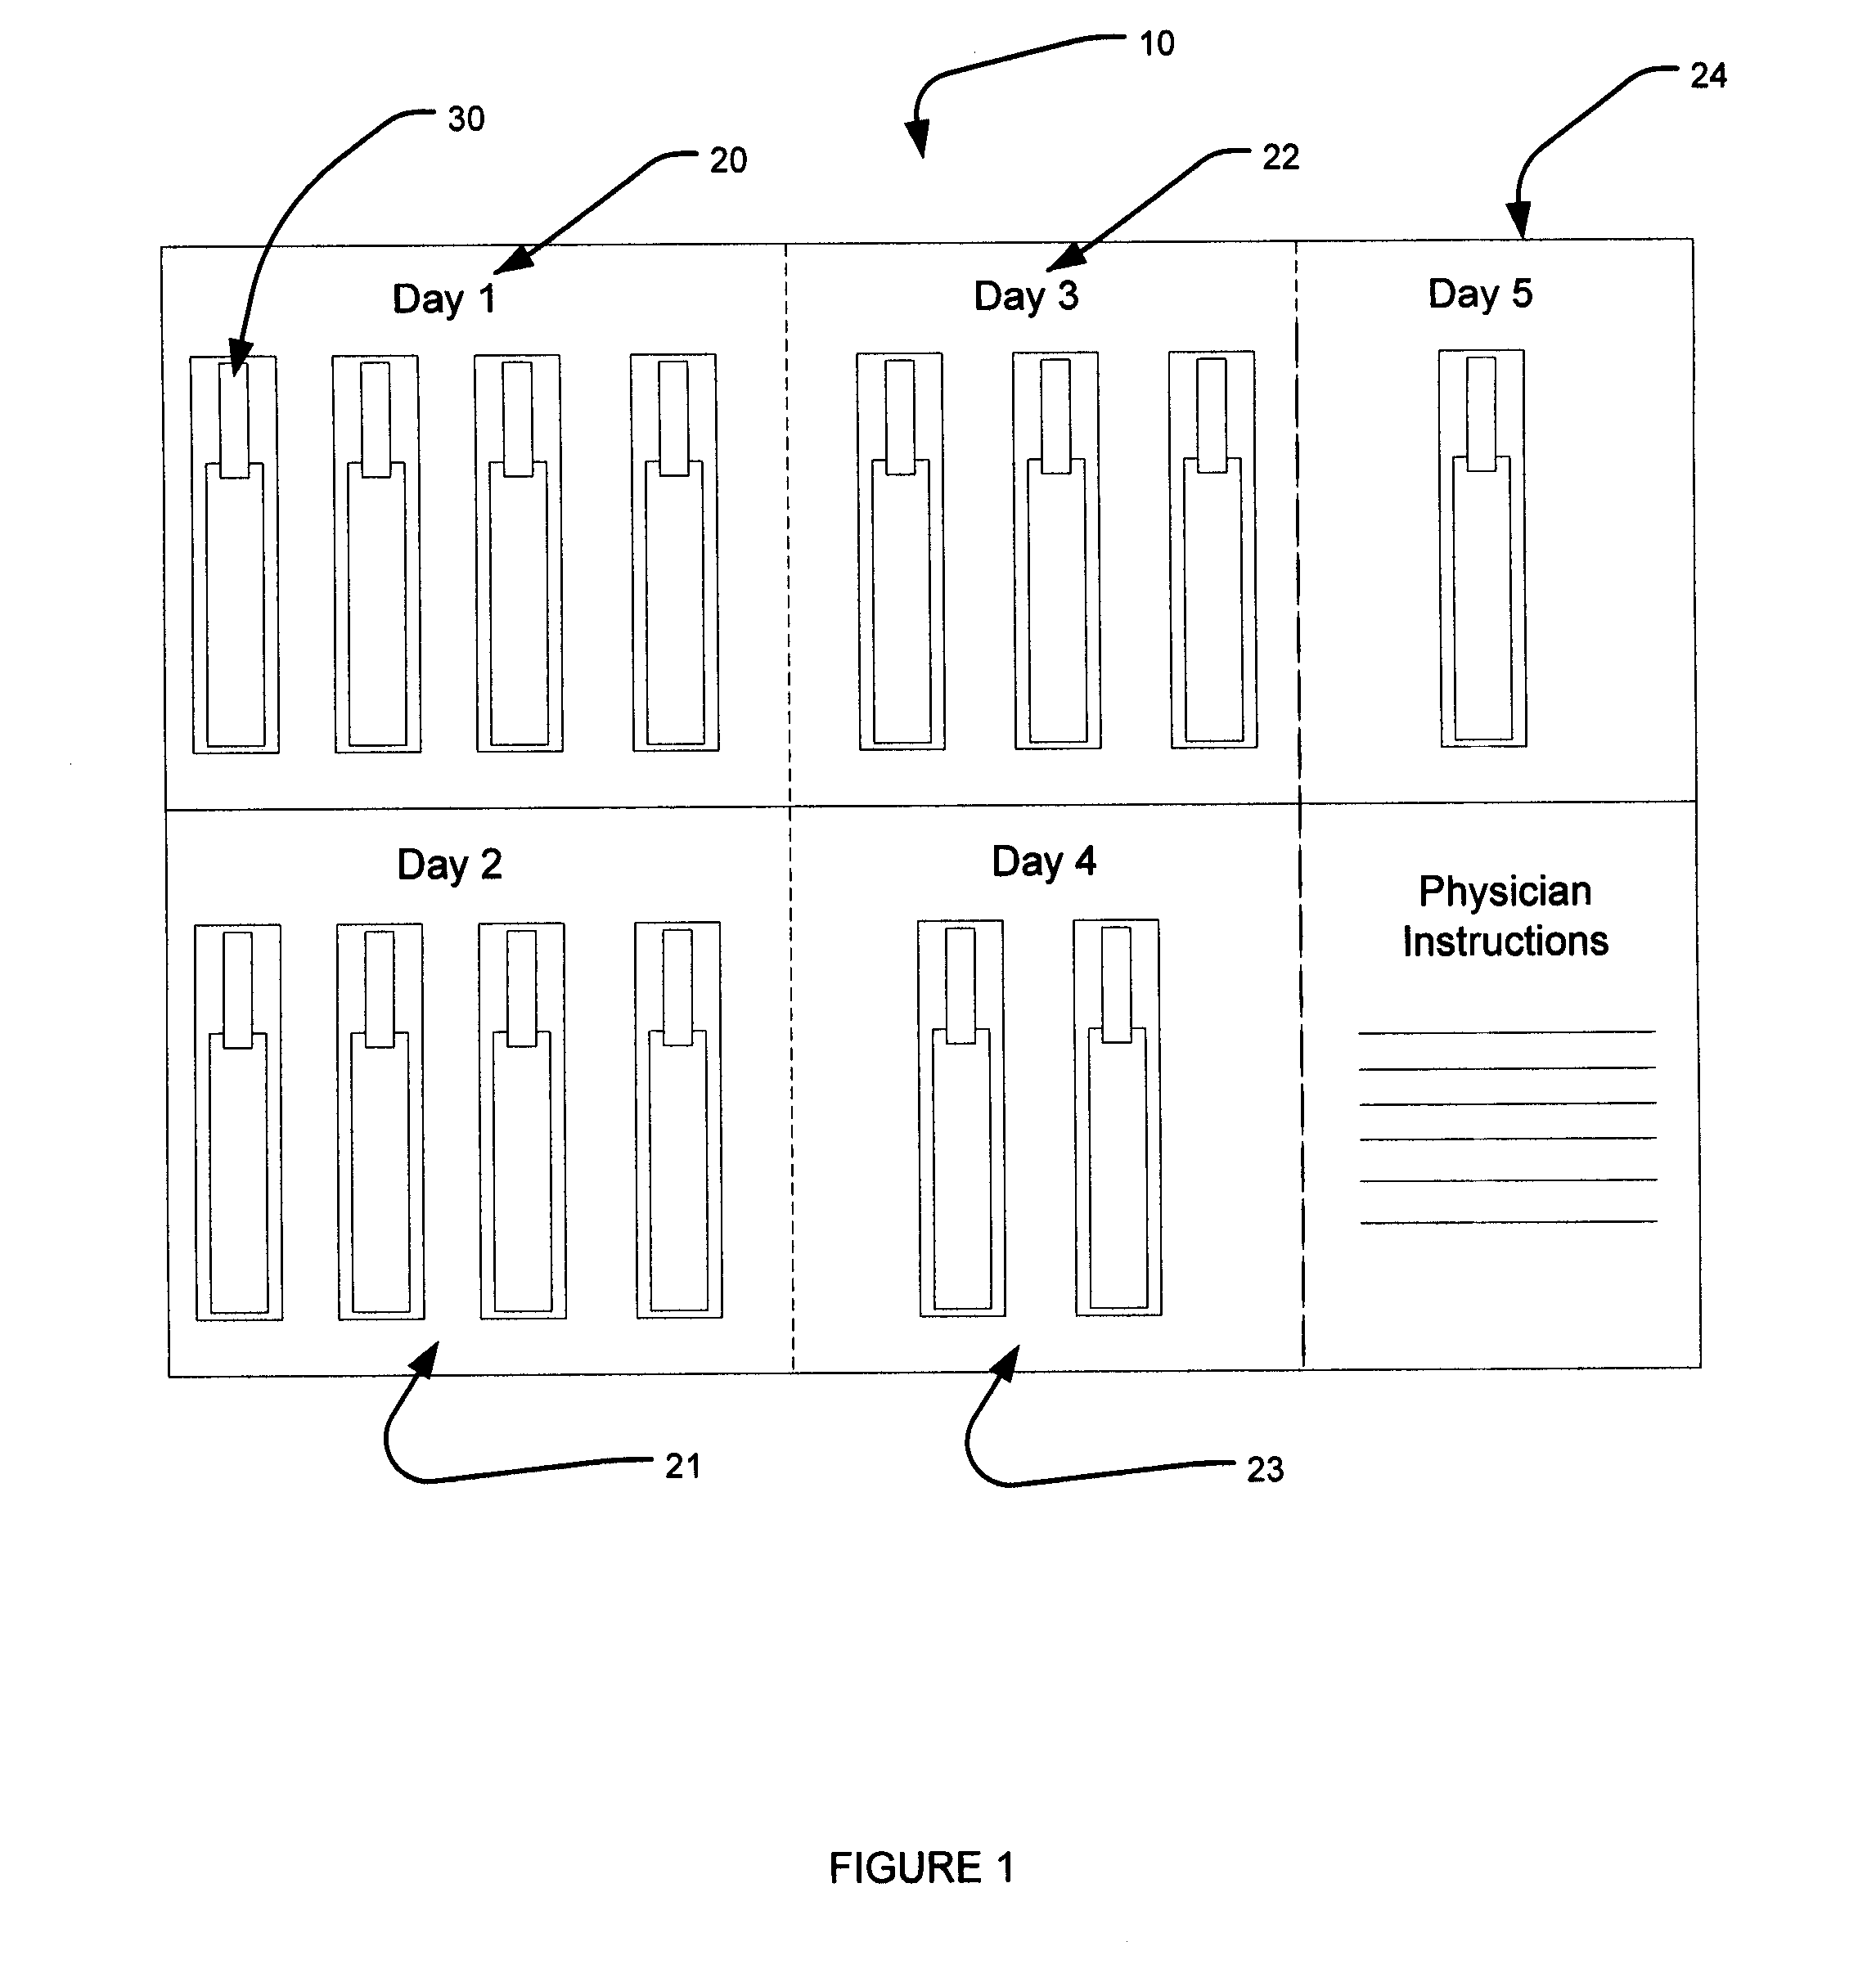 Dose packaging system for load-dose titration administration of a liquid formulation